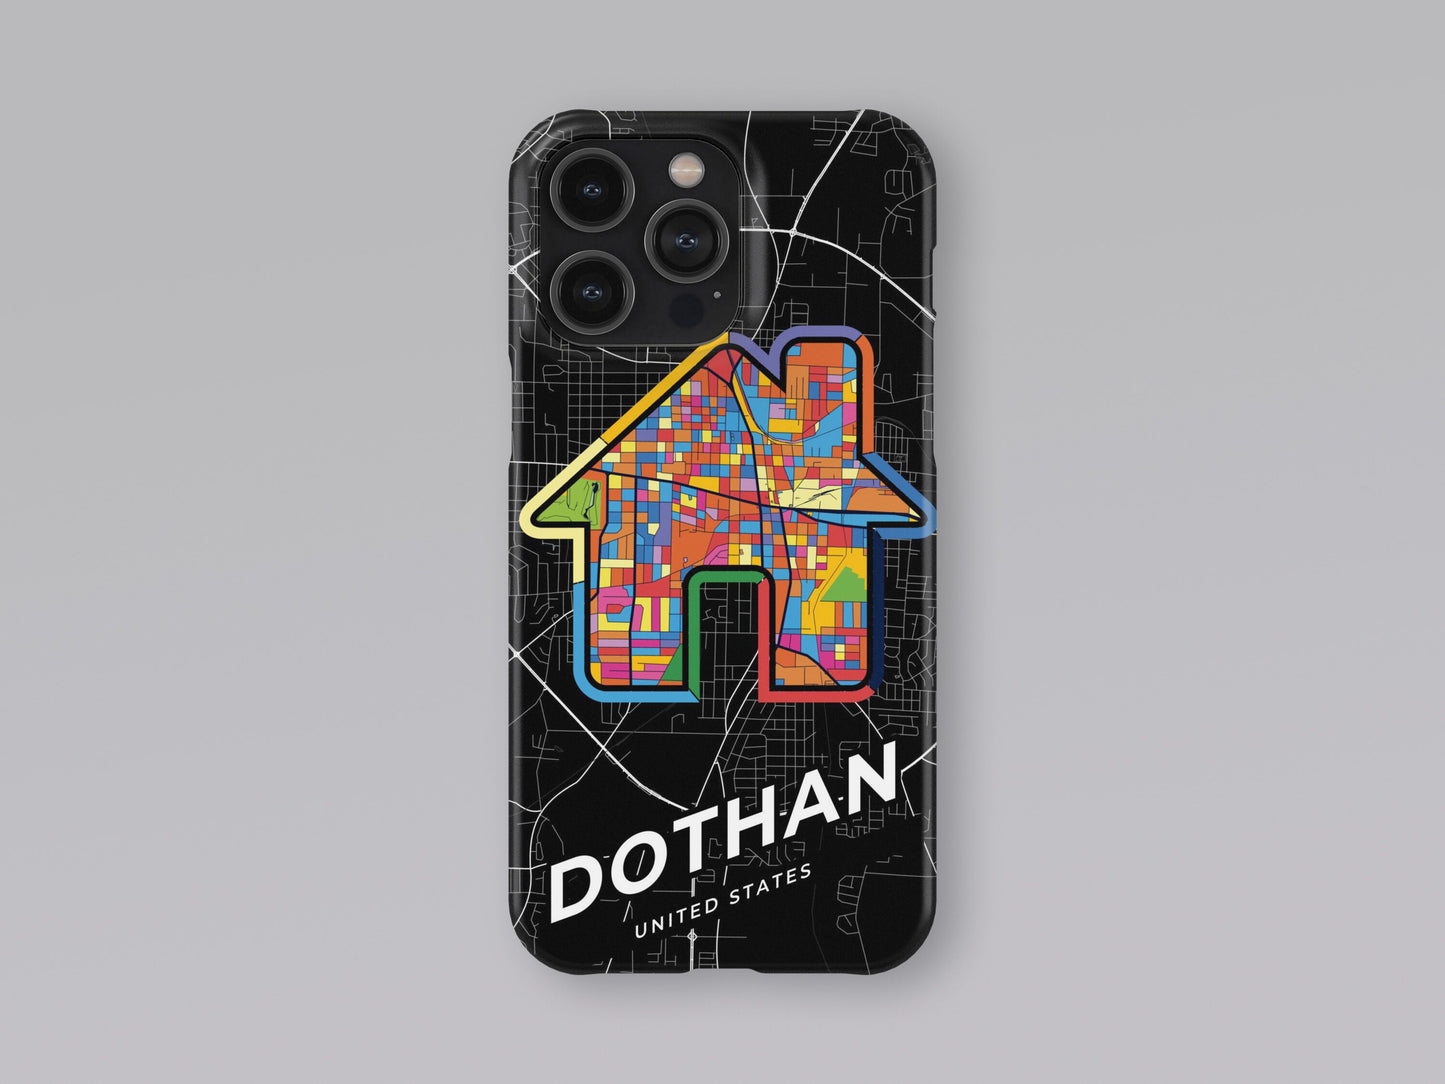 Dothan Alabama slim phone case with colorful icon. Birthday, wedding or housewarming gift. Couple match cases. 3